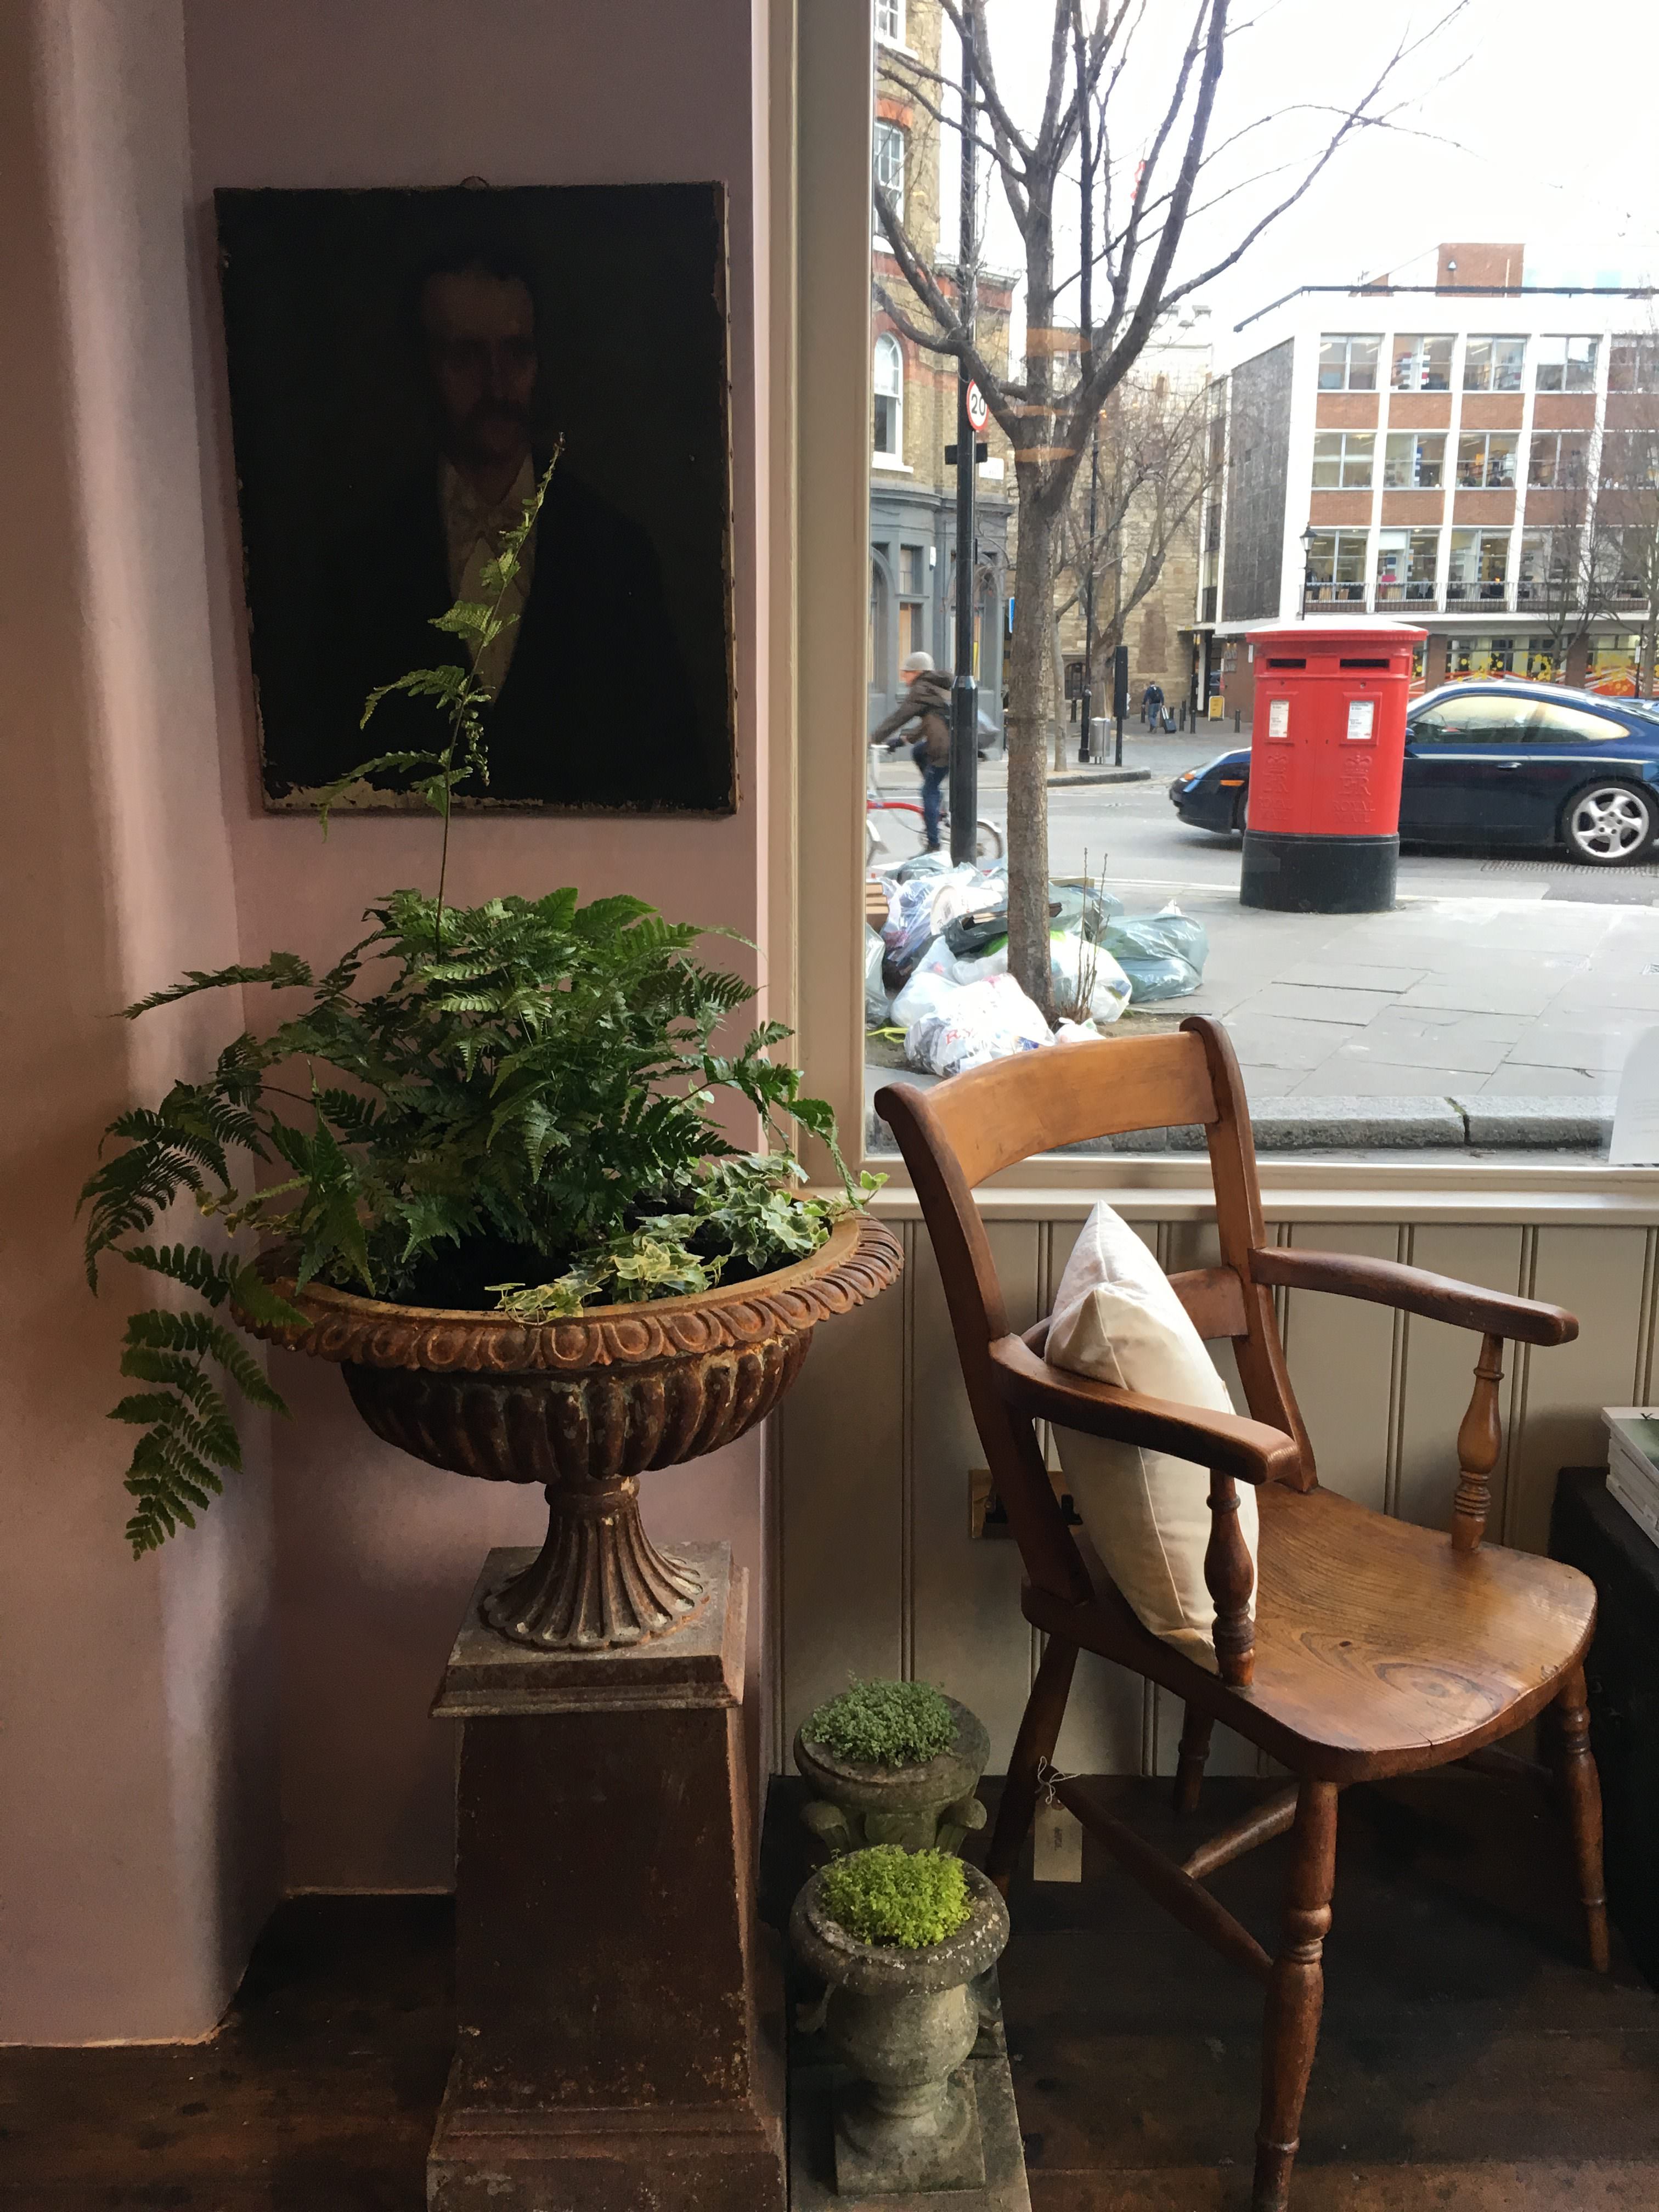 Plants and portraits and a chair with a view of The Order of St John and St Johns Gate, Clerkenwell